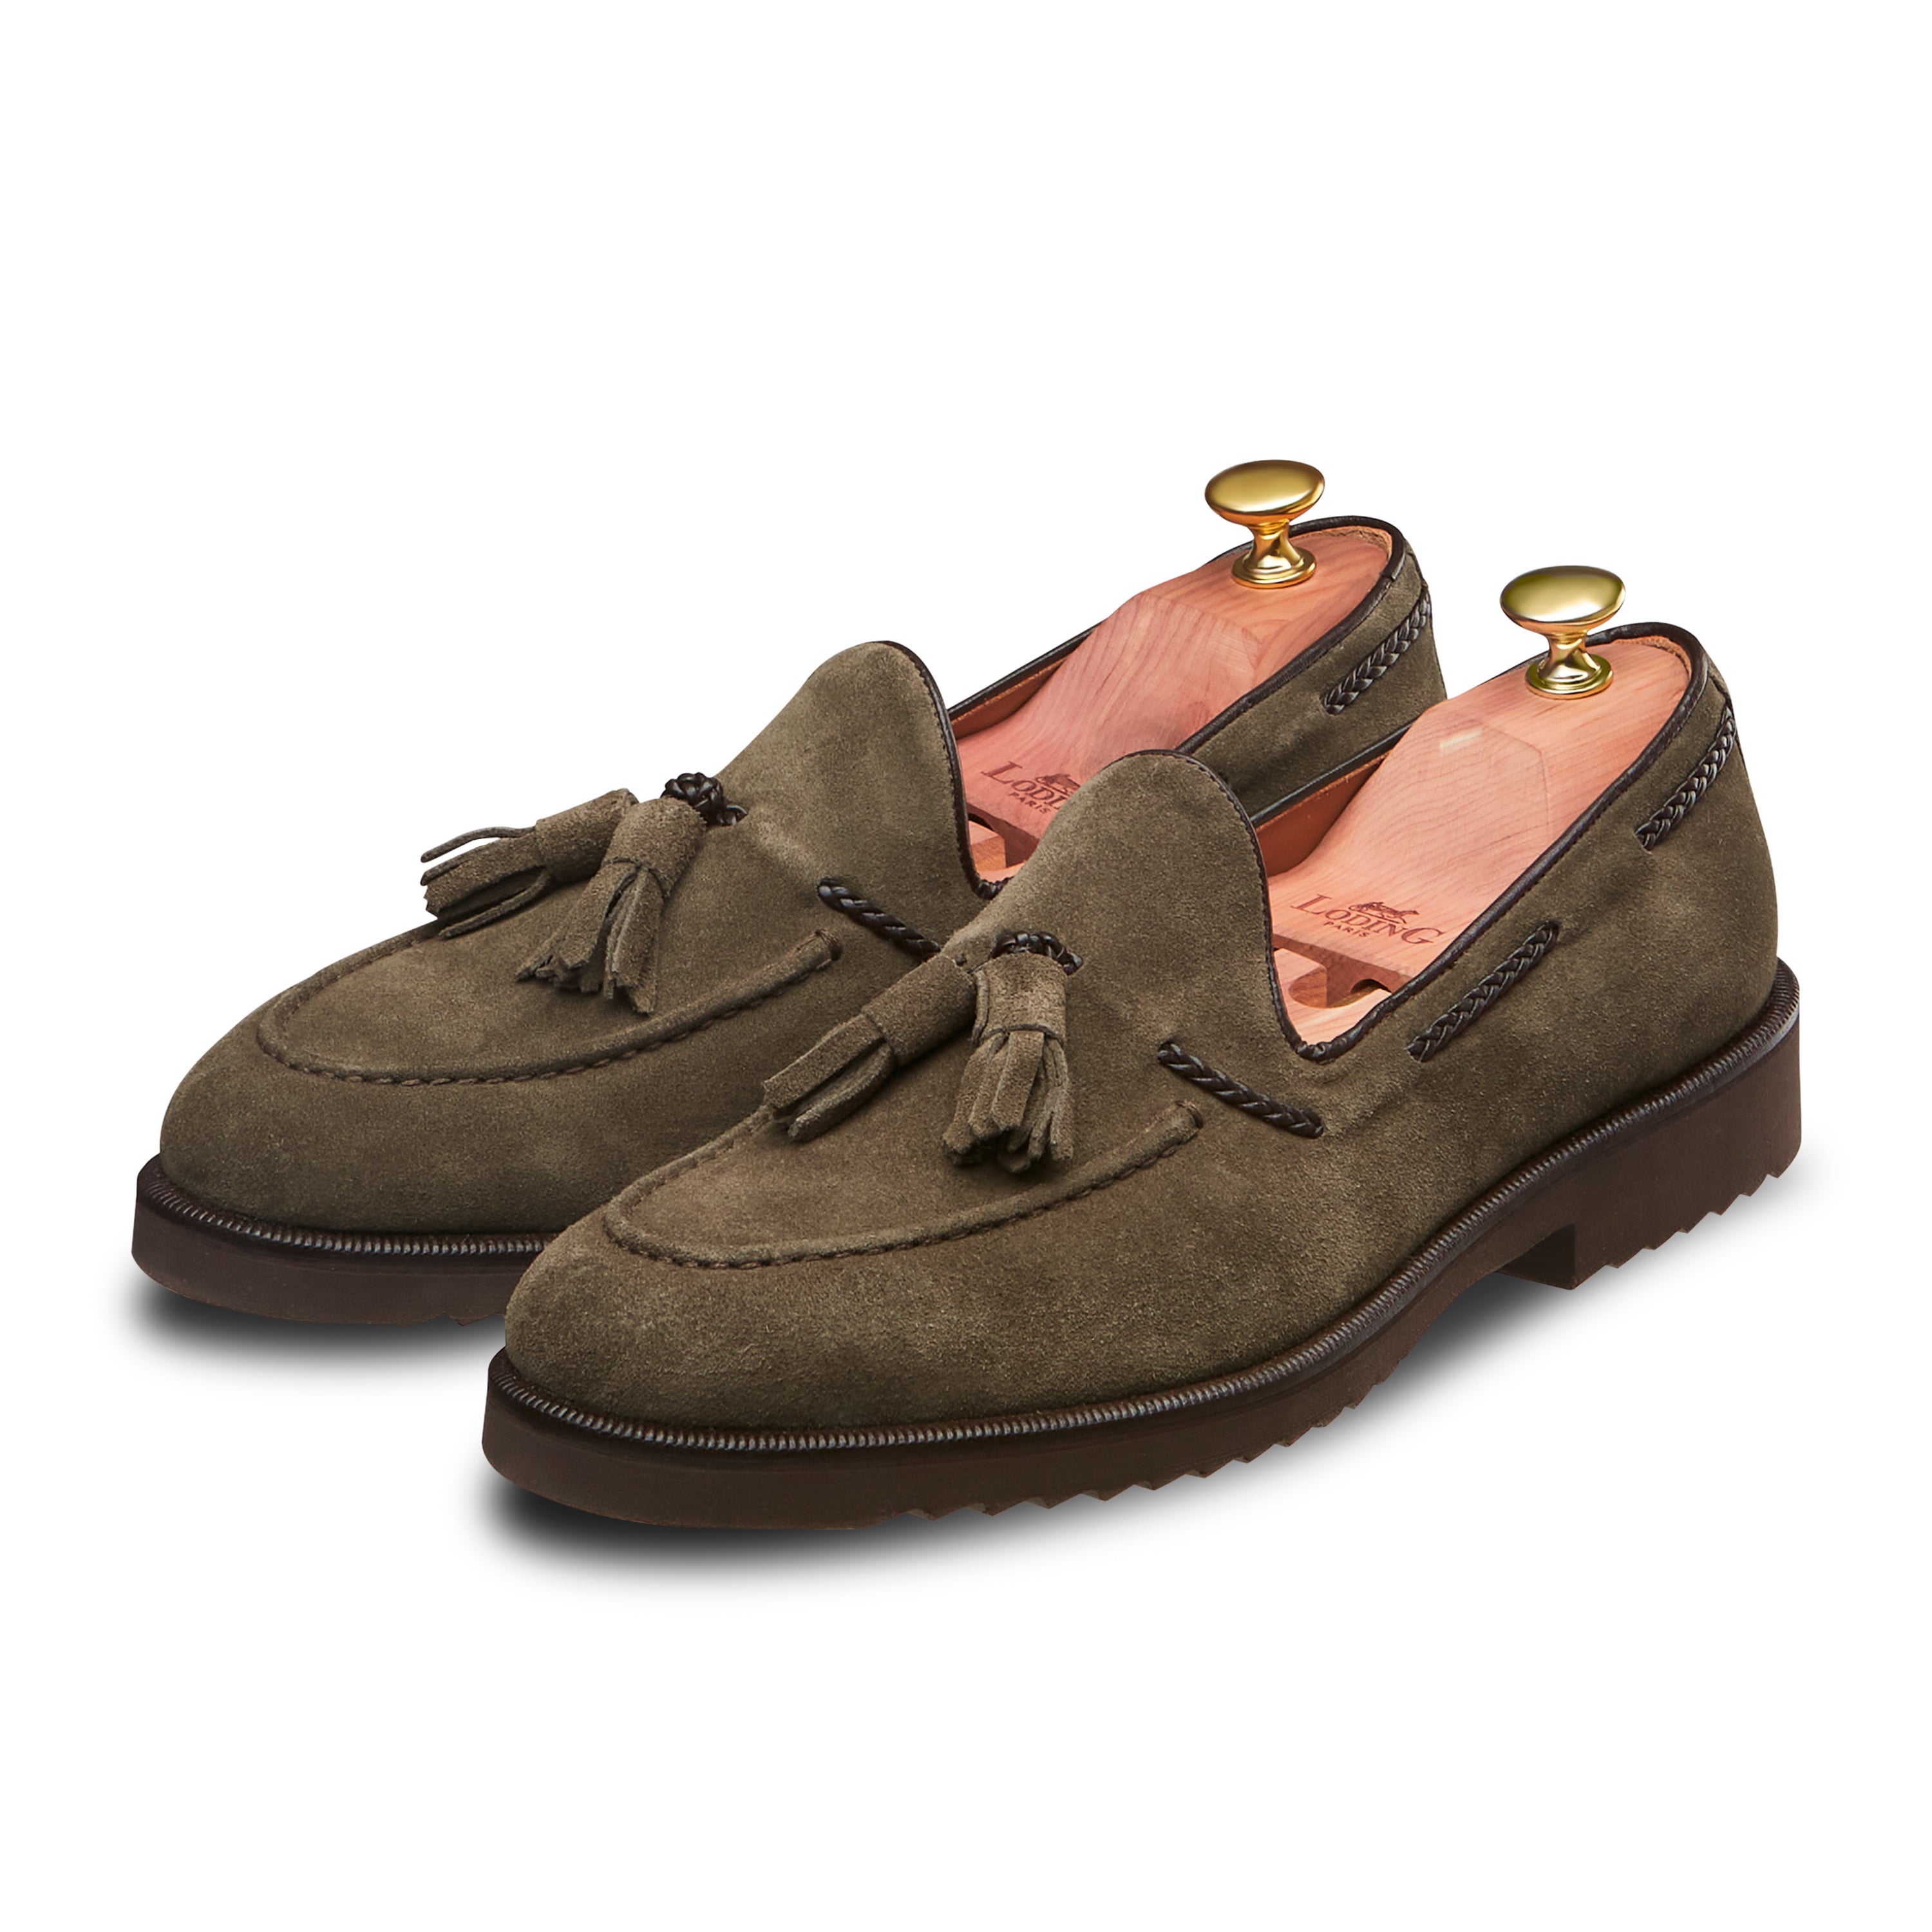 Mocassin à pampille Strano 396 veau velours taupe - 40 / Taupe